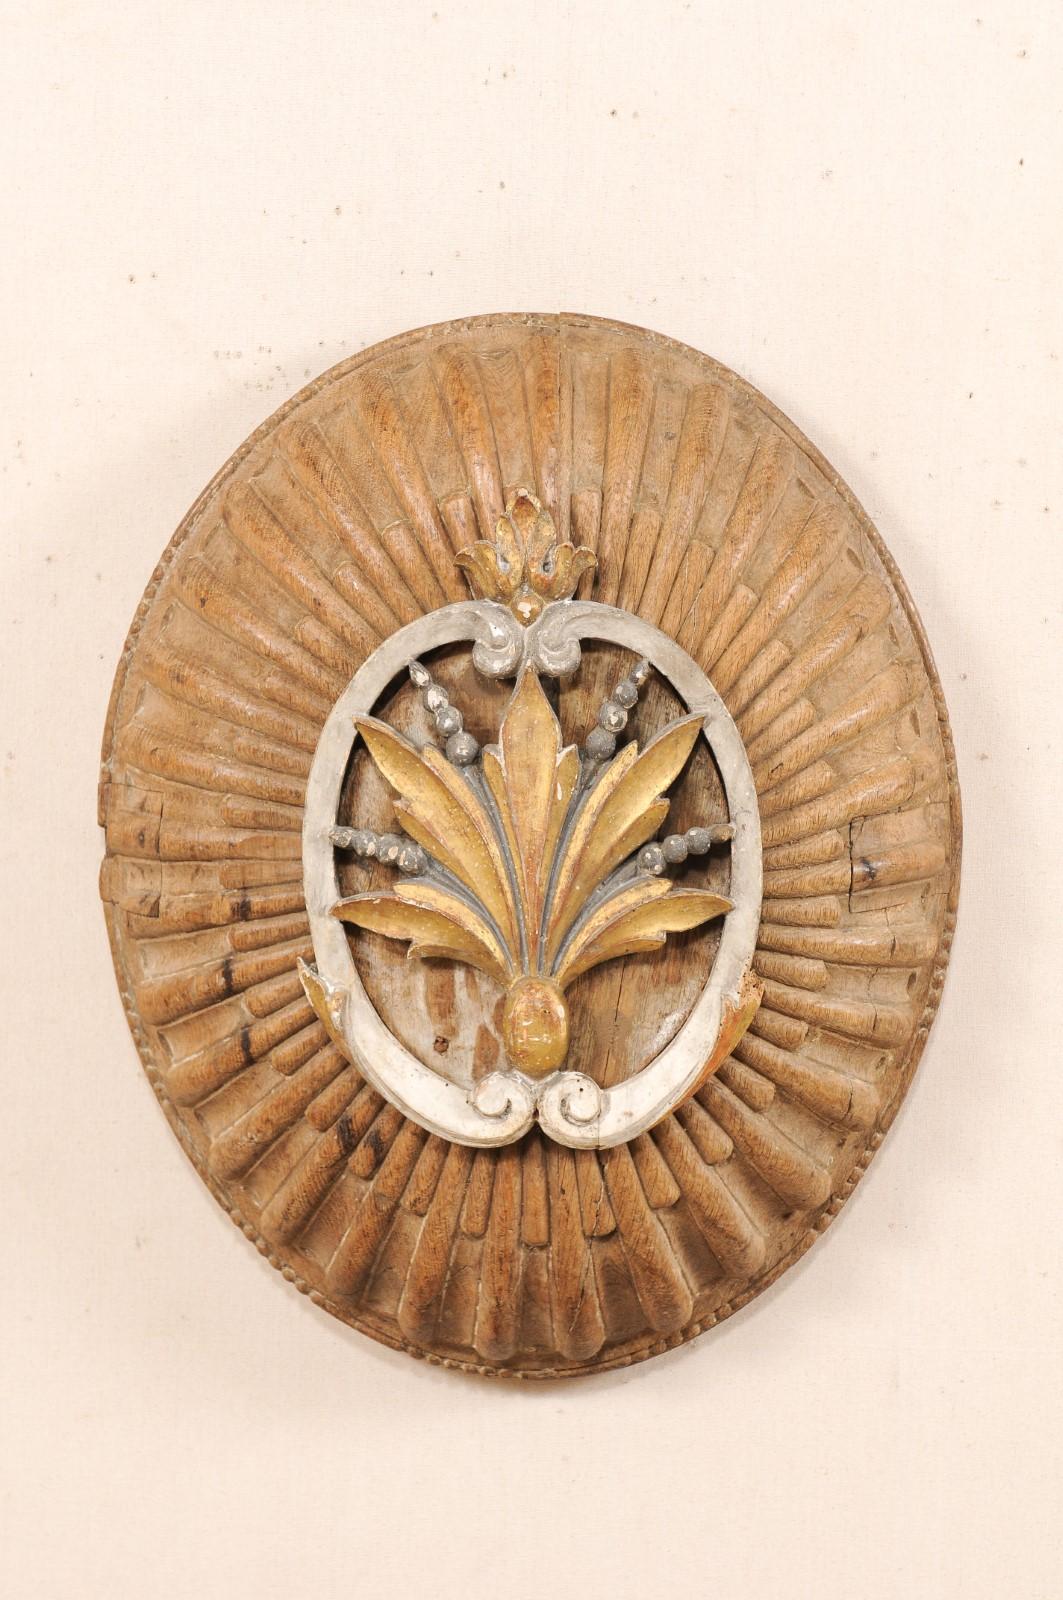 An Italian carved wood fragment wall ornament from the 19th century. This antique wall plaque from Italy has a domed, oval-shape, hand-carved with emphasis at raised center plaque with leaf motif framed within a pair of c-scrolls. Undulating rays